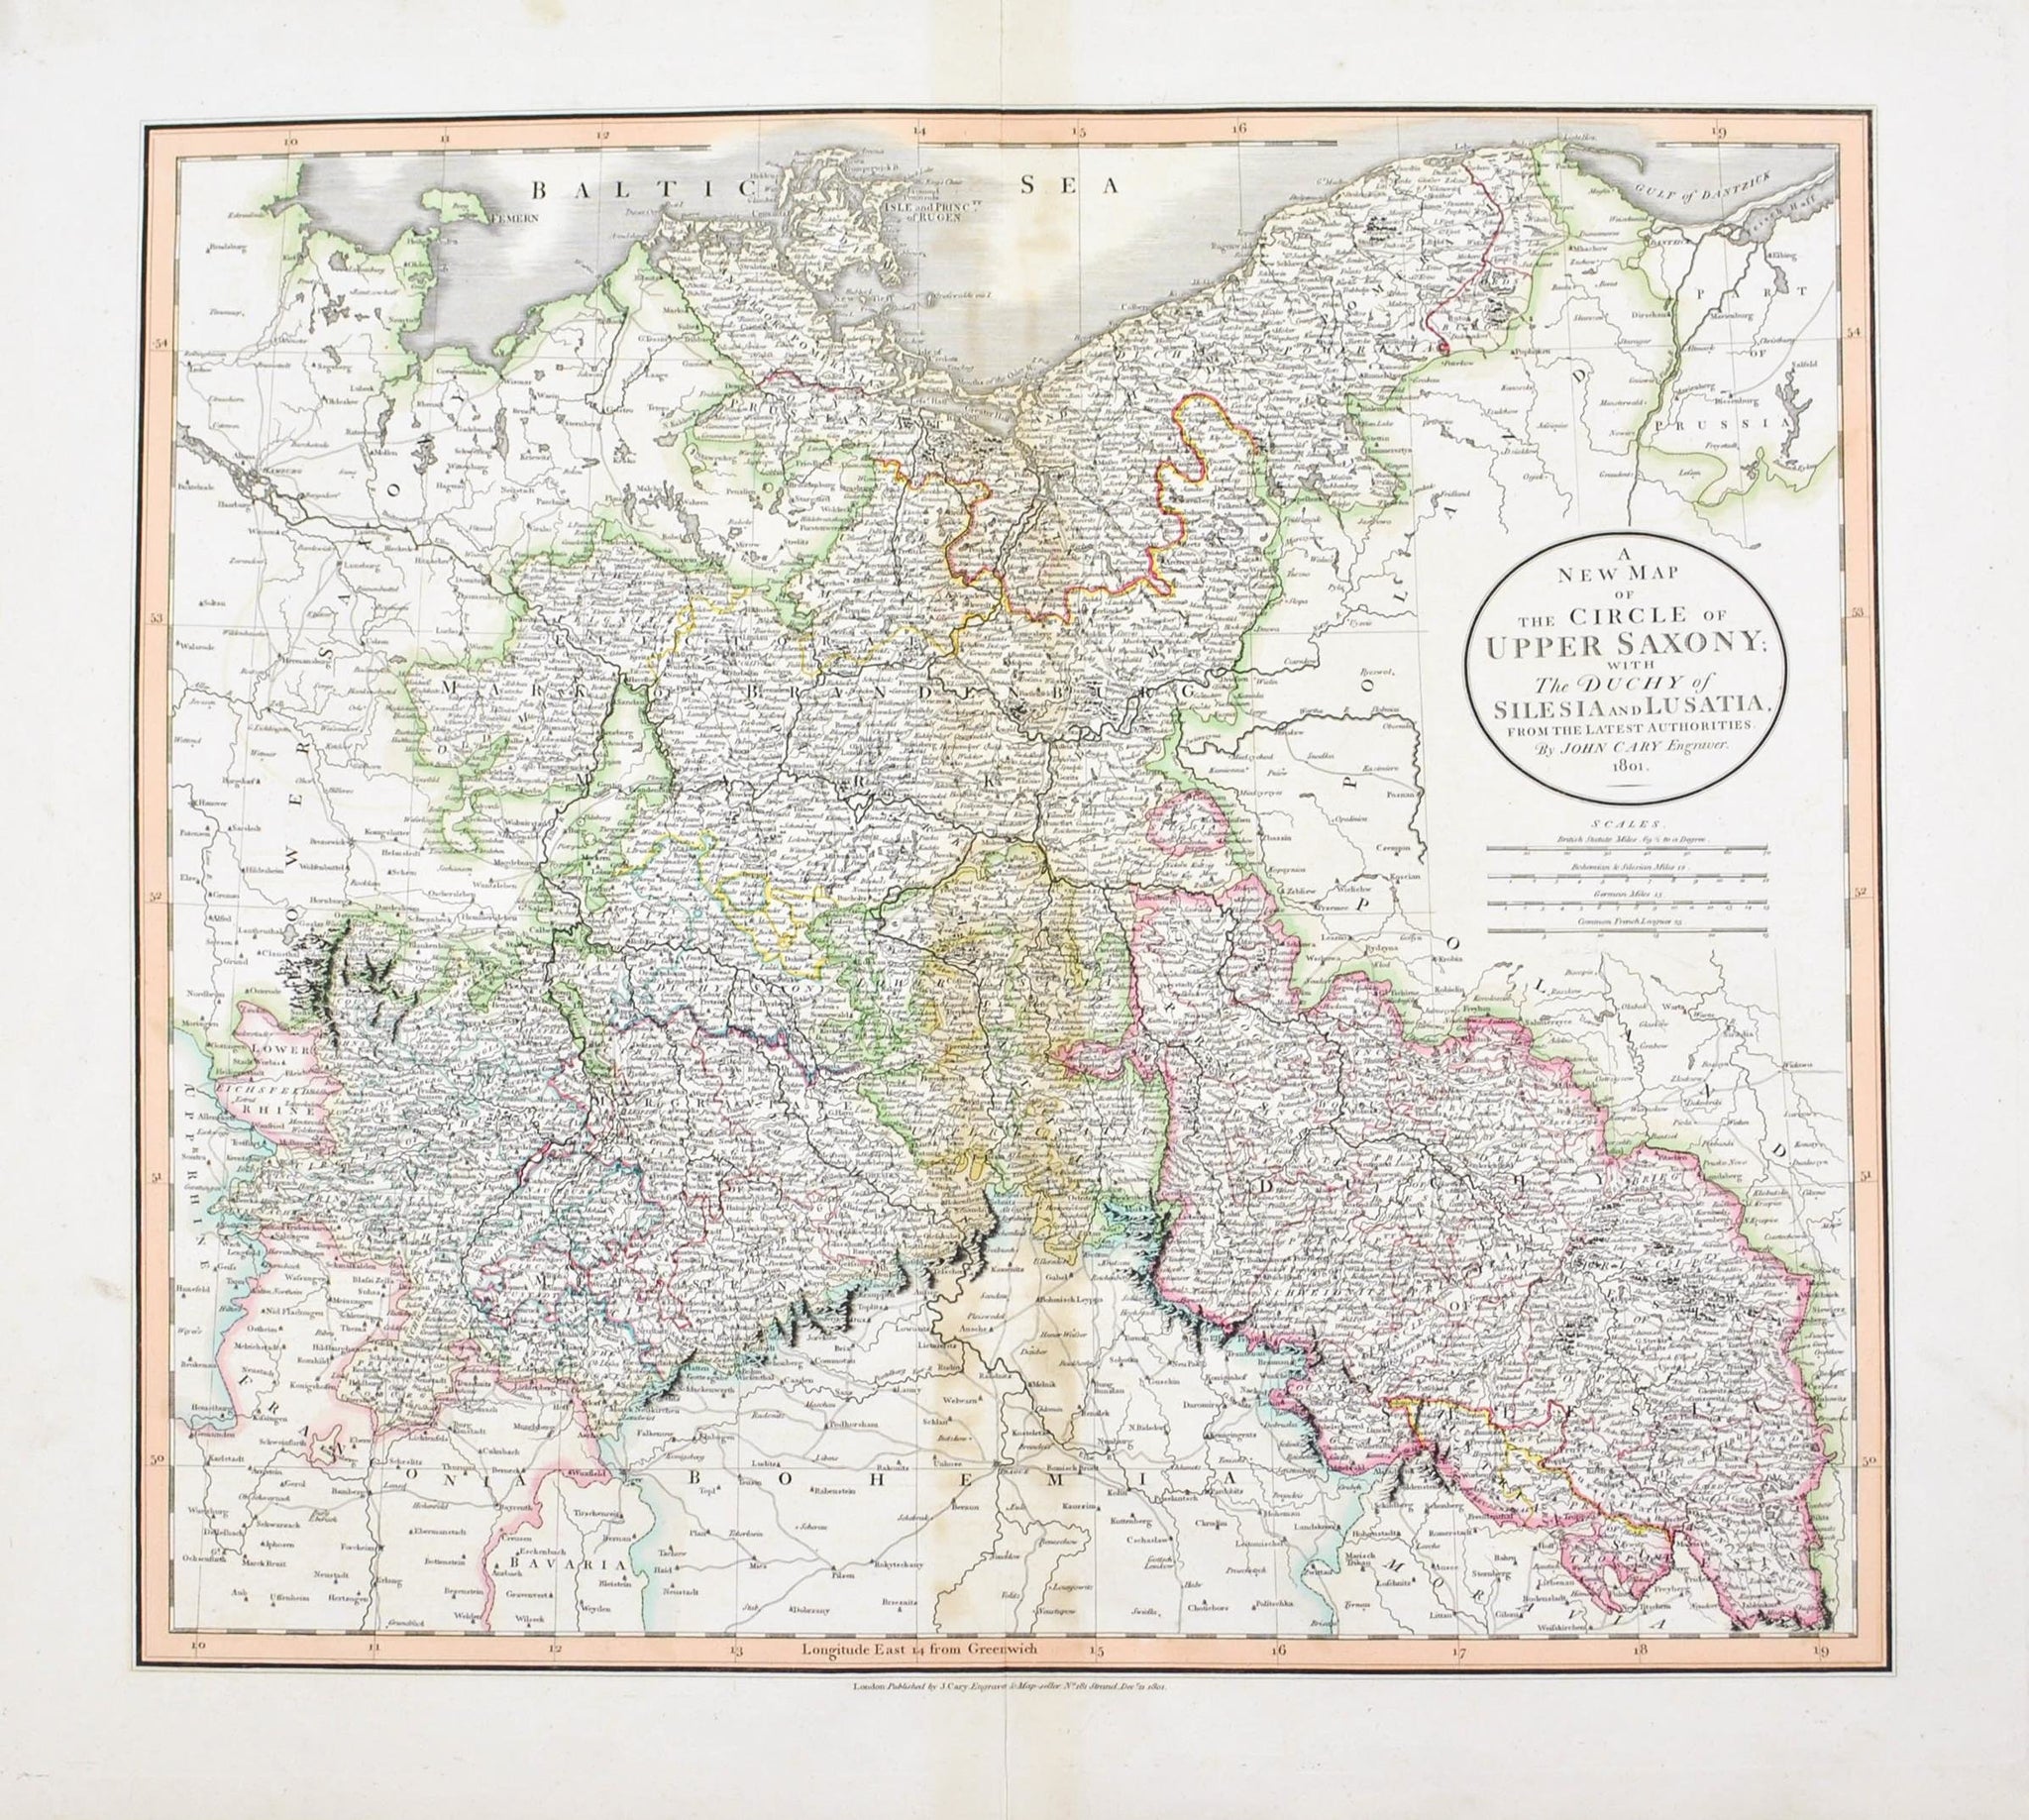 1808 A New Map of the Circle of Upper Saxony - Cary - Historic Accents